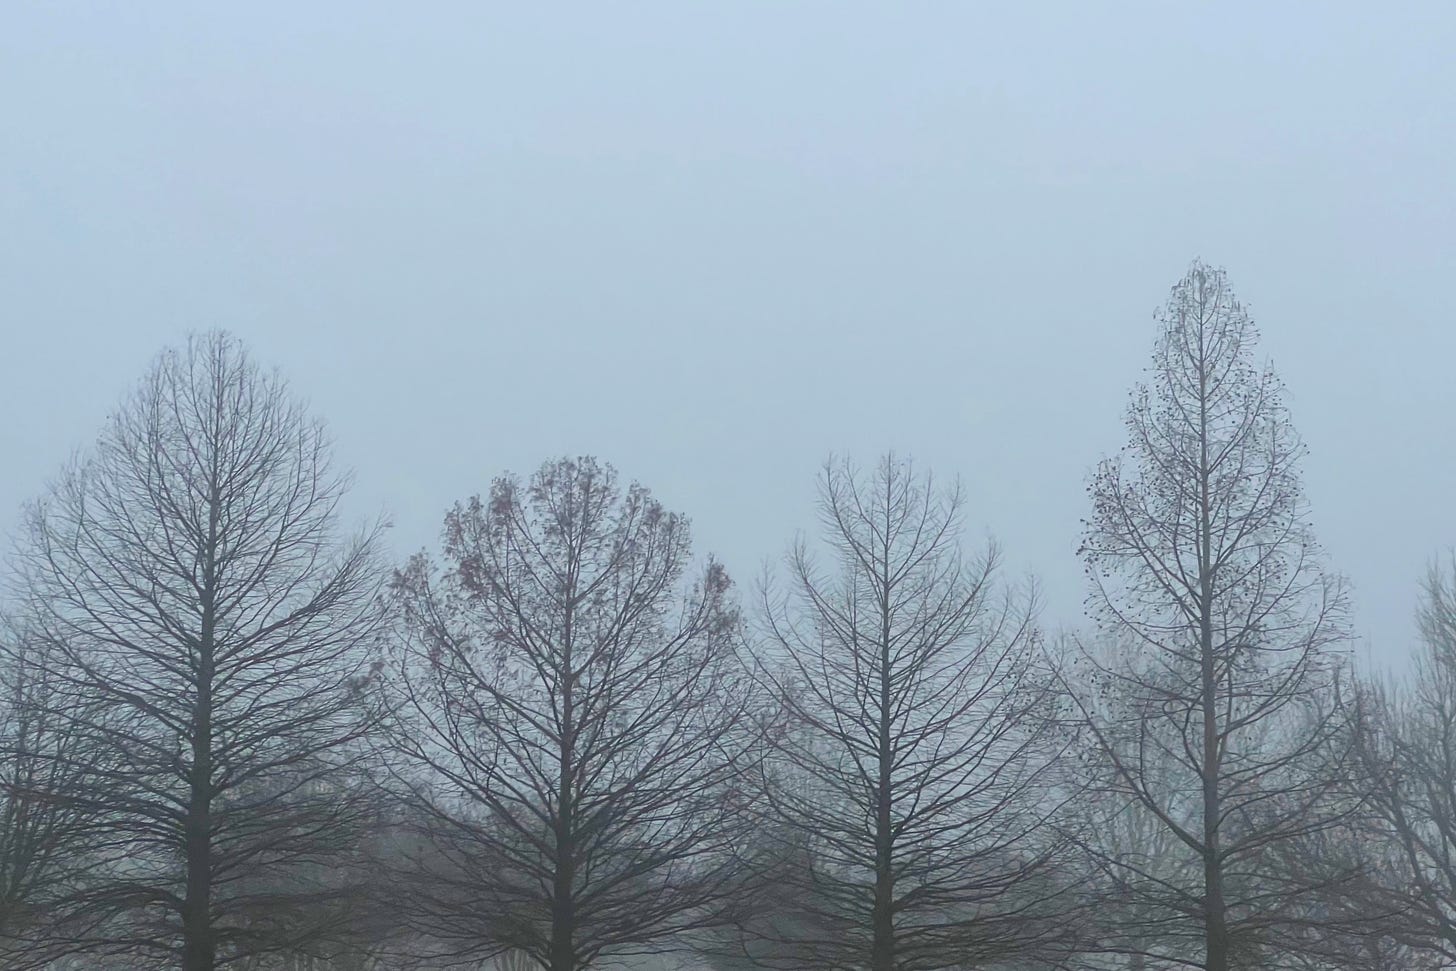 The fog shrouds a line of bare-limbed trees against a bluish-grey sky